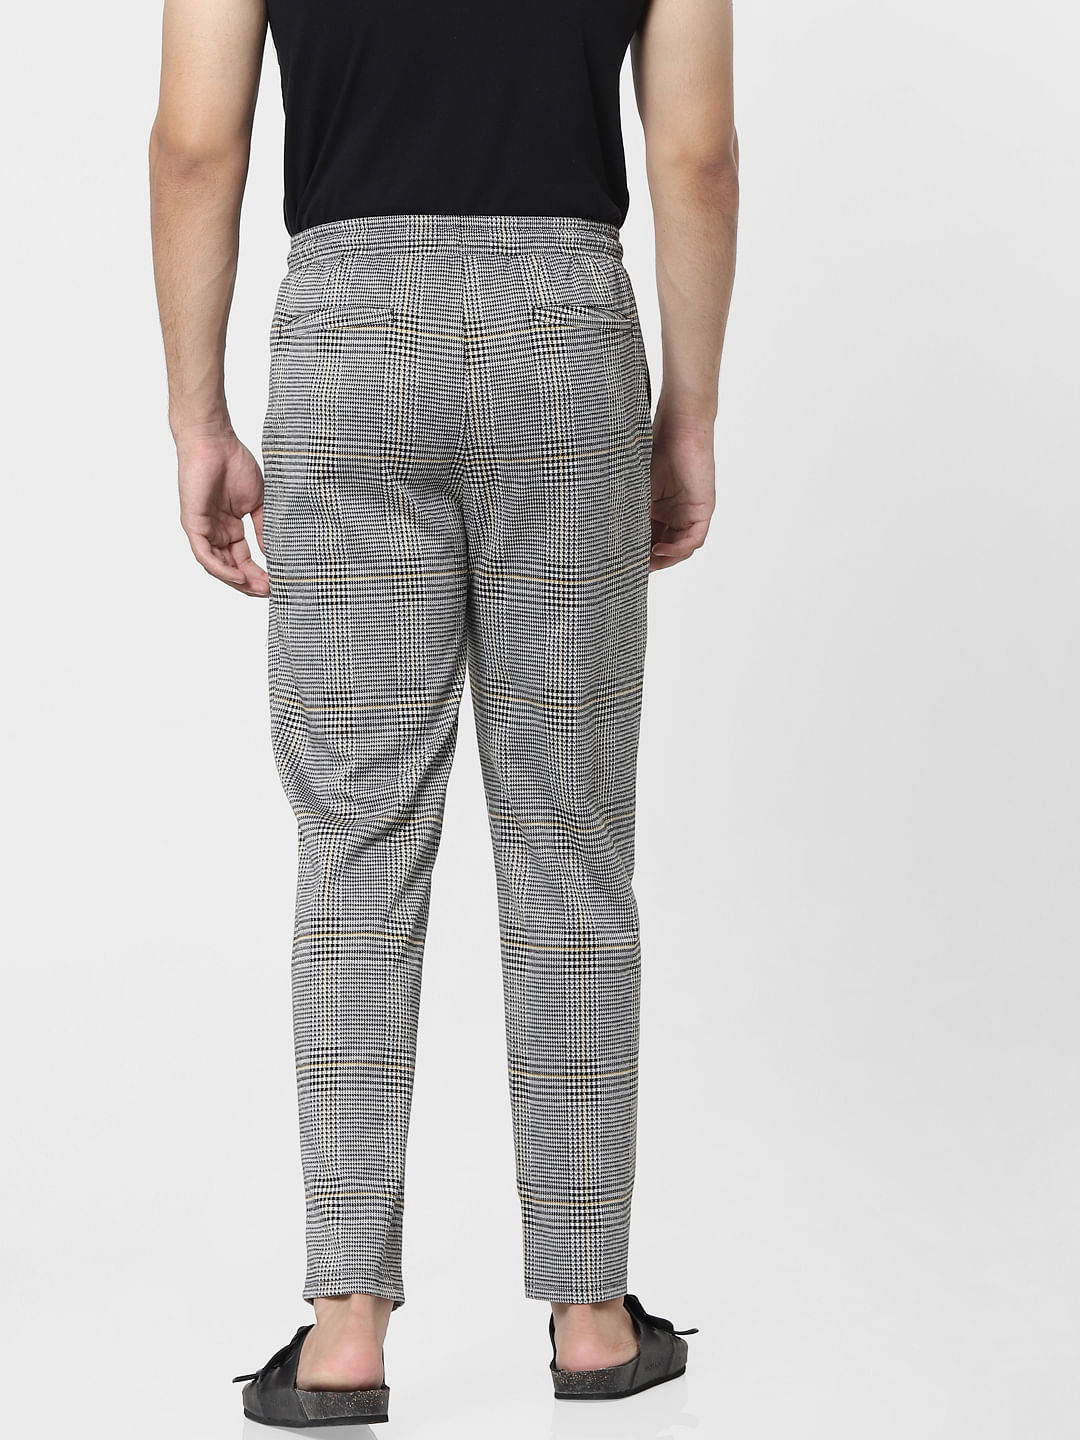 Slim Fit Trousers  GreyChecked  Men  HM IN